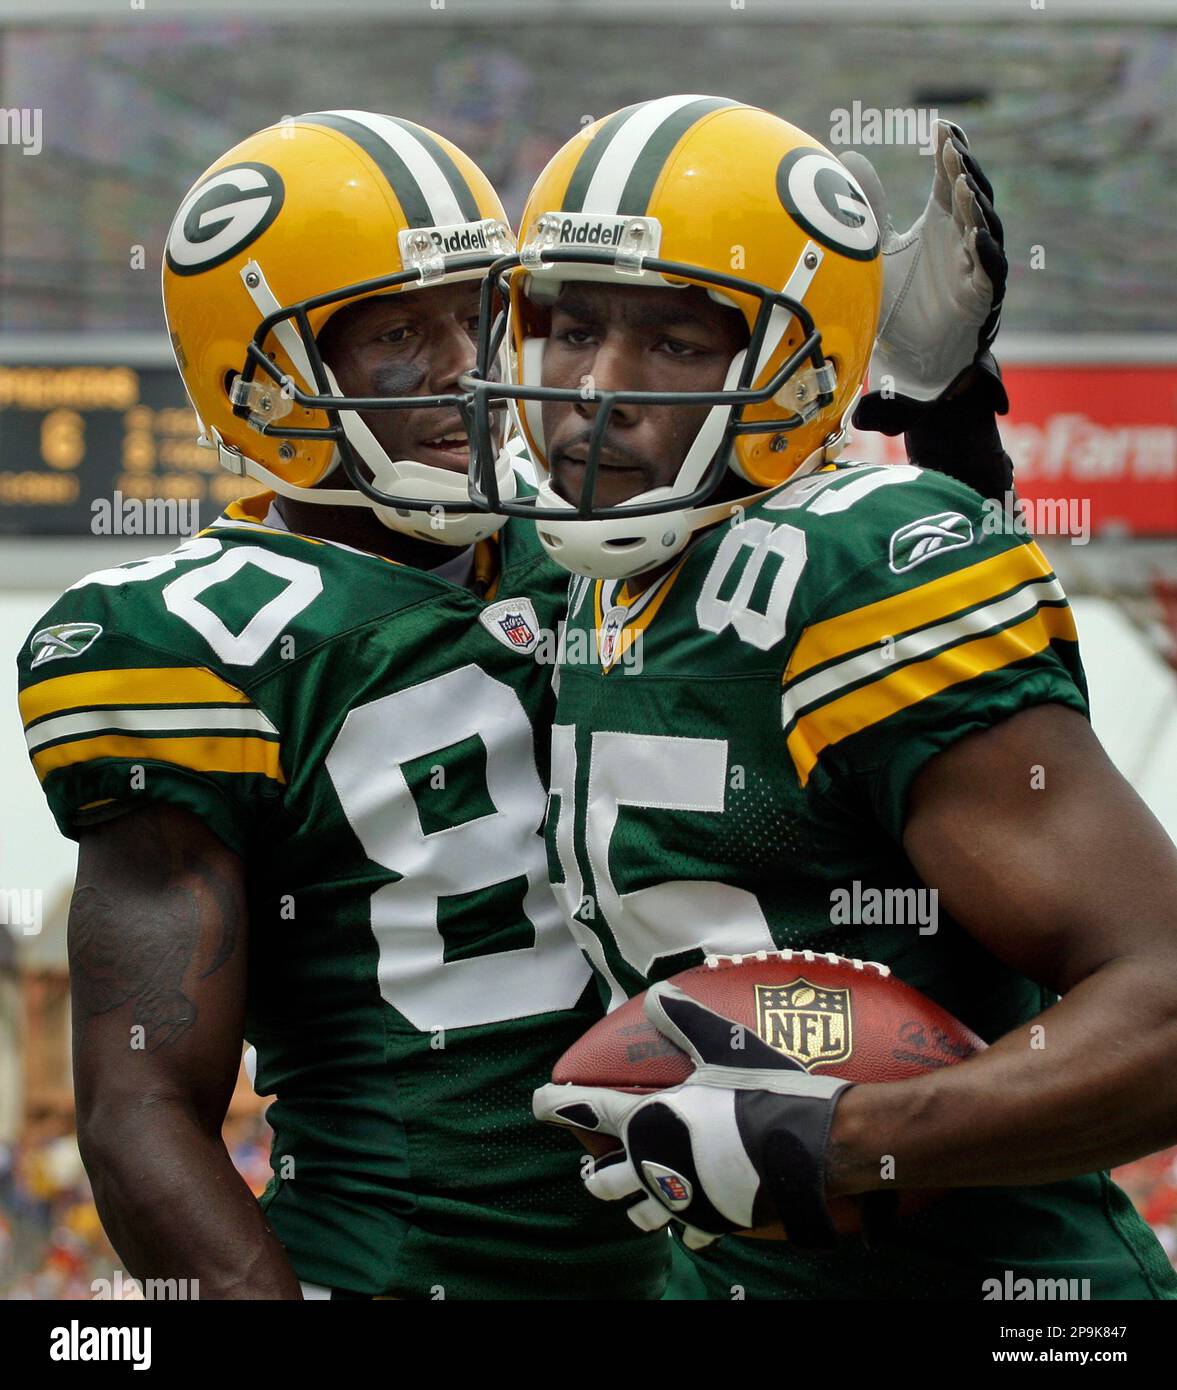 Gree Bay Packers wide receiver Greg Jennings (85) celebrates with teammate  Donald Driver after catching a first-quarter touchdown pass against the  Tampa Bay Buccaneers during an NFL football game, Sunday, Sept. 28,